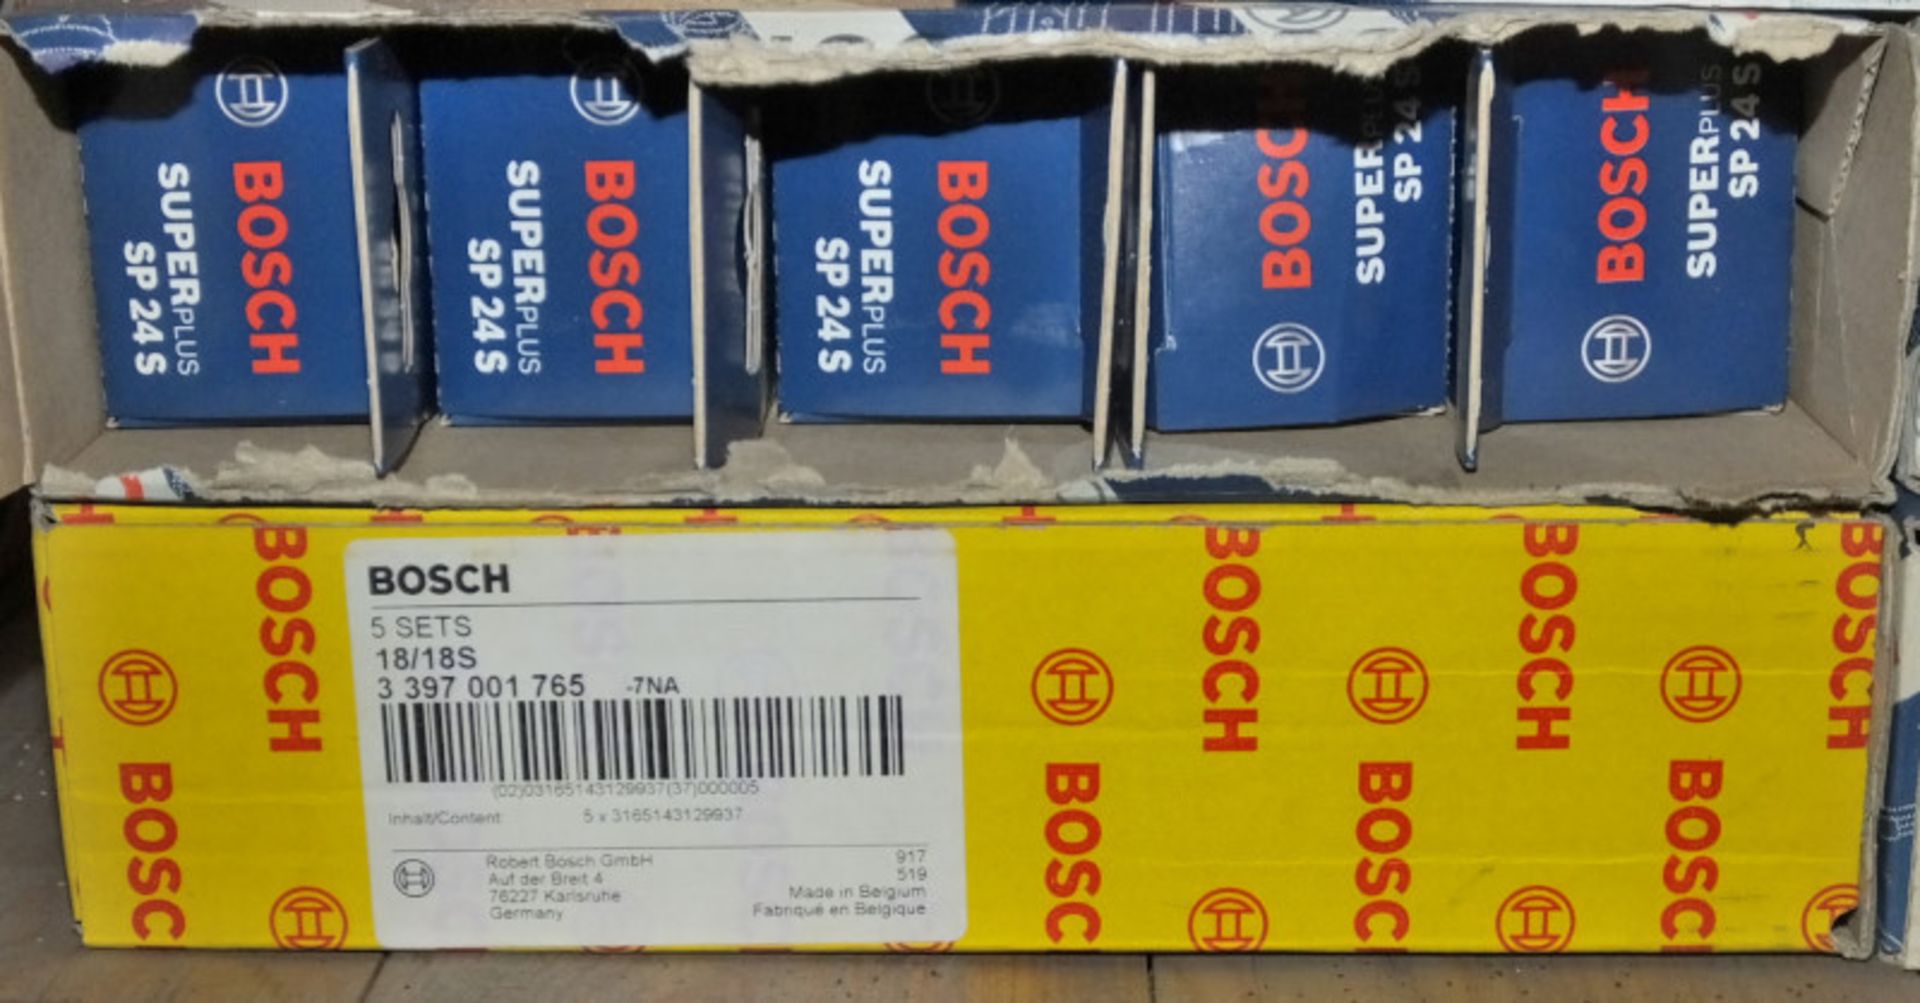 Bosch Wiper Blade Assortment - Please check pictures for example of sizes and model number - Image 4 of 4